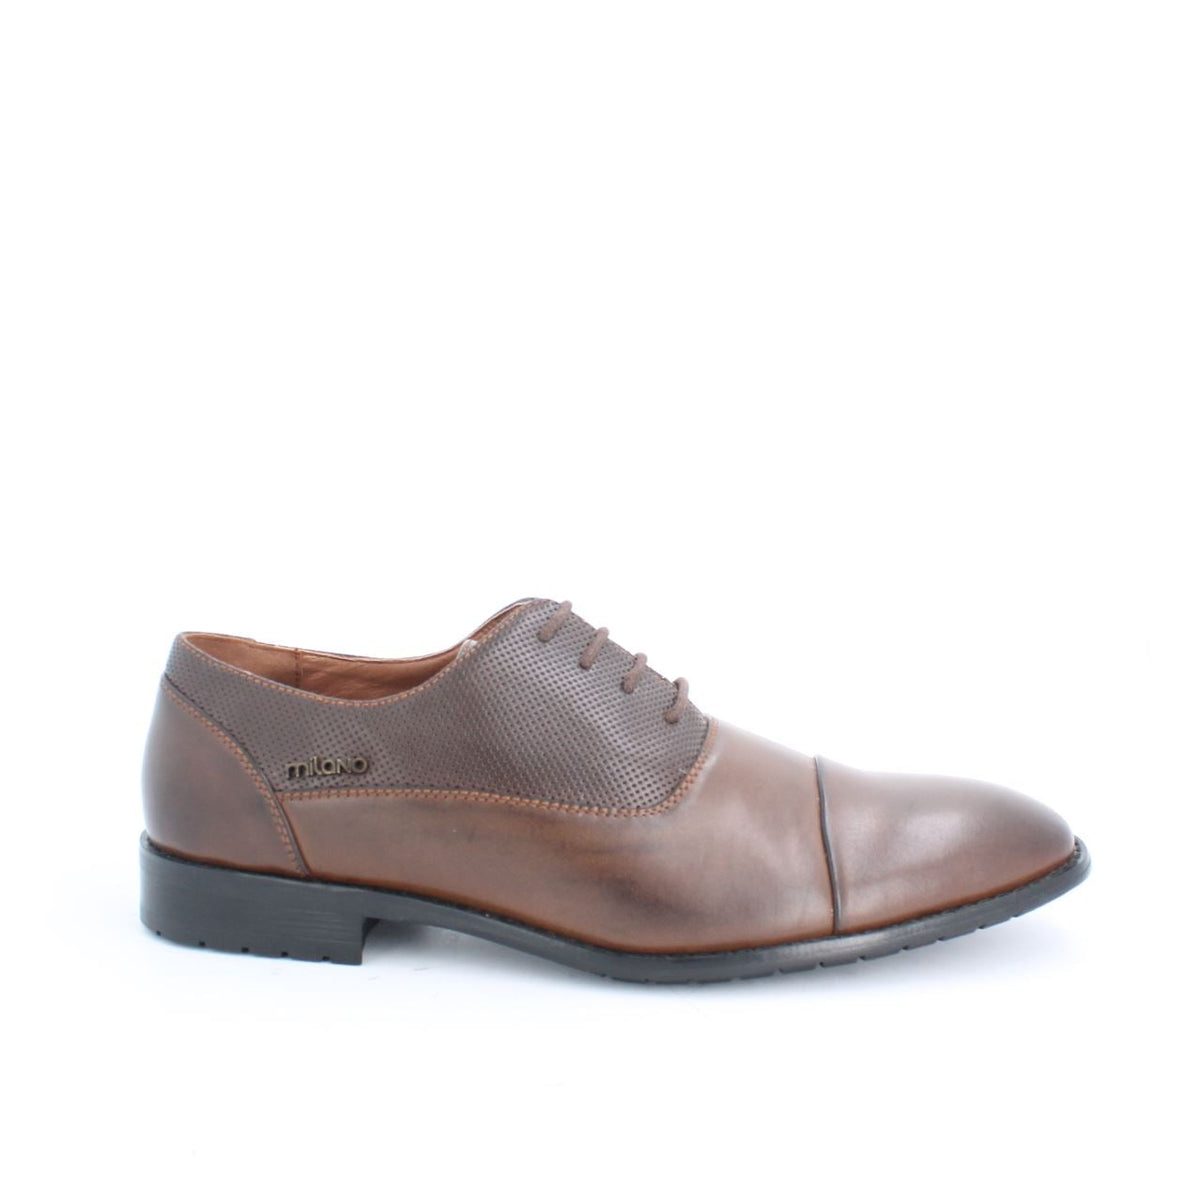 VEEONIA OXFORD SHOES - BROWN